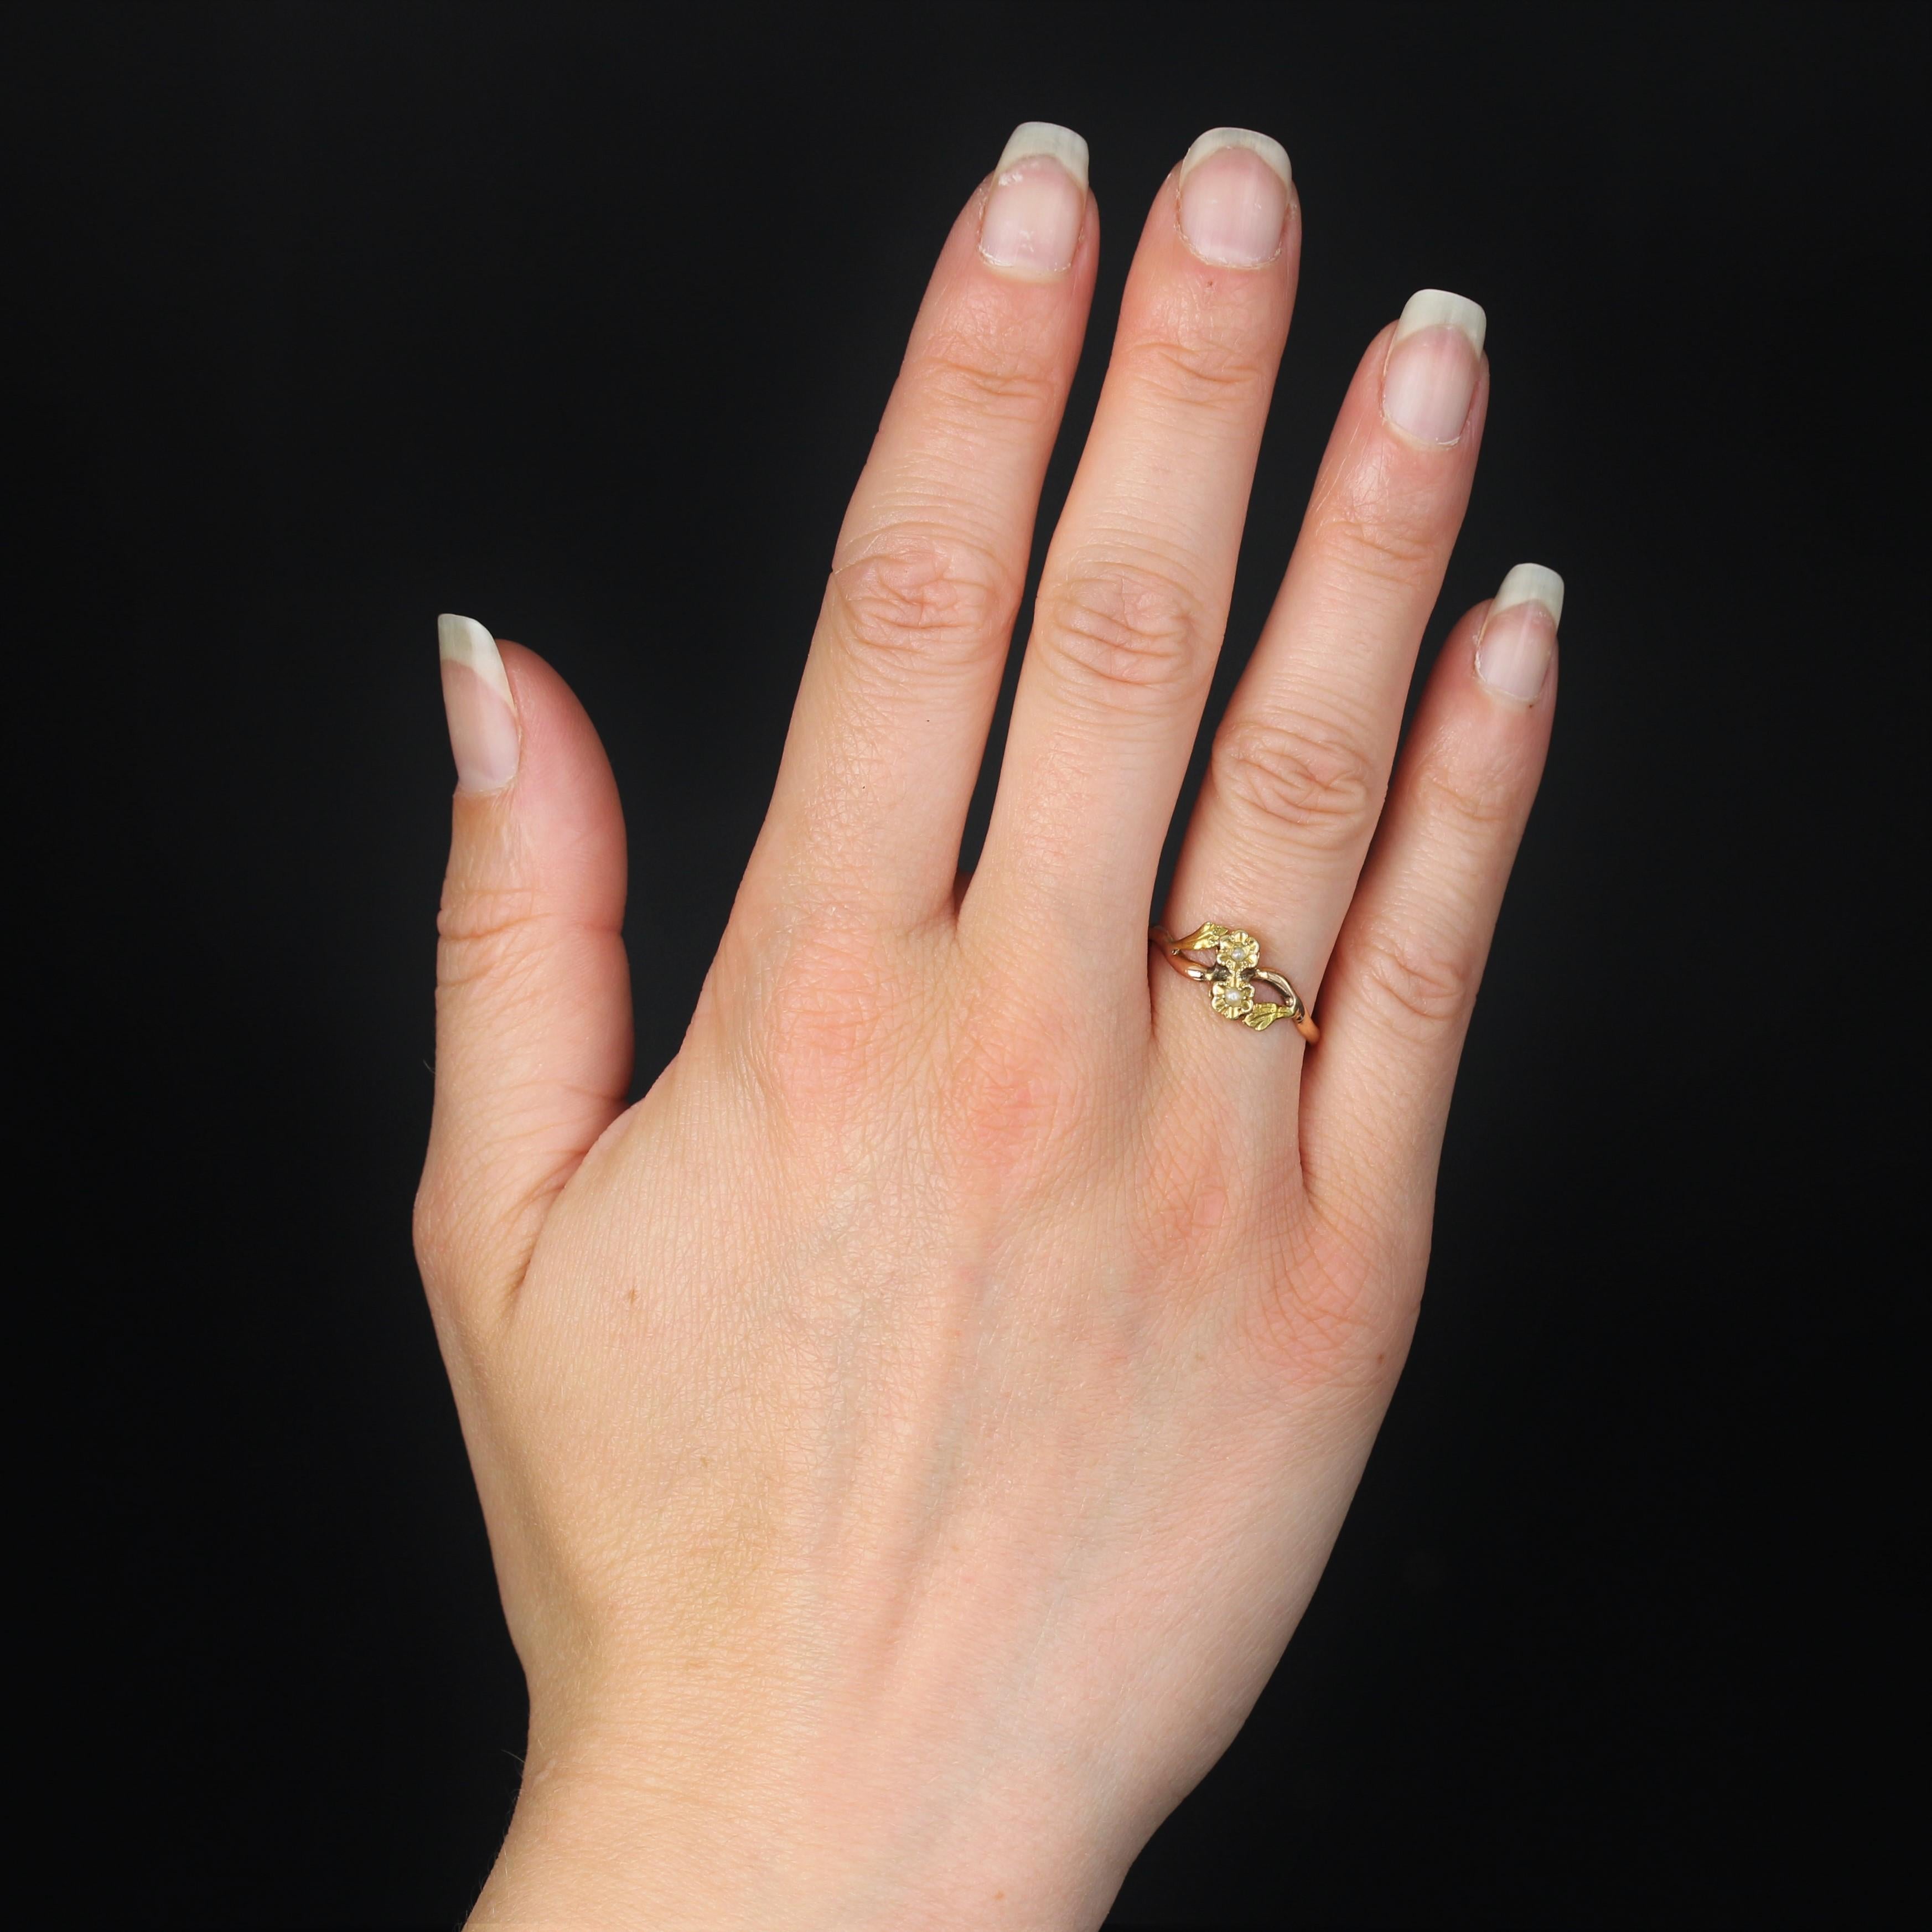 Ring in 18 karat yellow and rose gold, eagle head hallmark.
Antique You and Me ring, featuring a rose gold ring forming a wave motif on the front and adorned with 2 yellow gold flower motifs, each set with a fine half-pearl and decorated on either